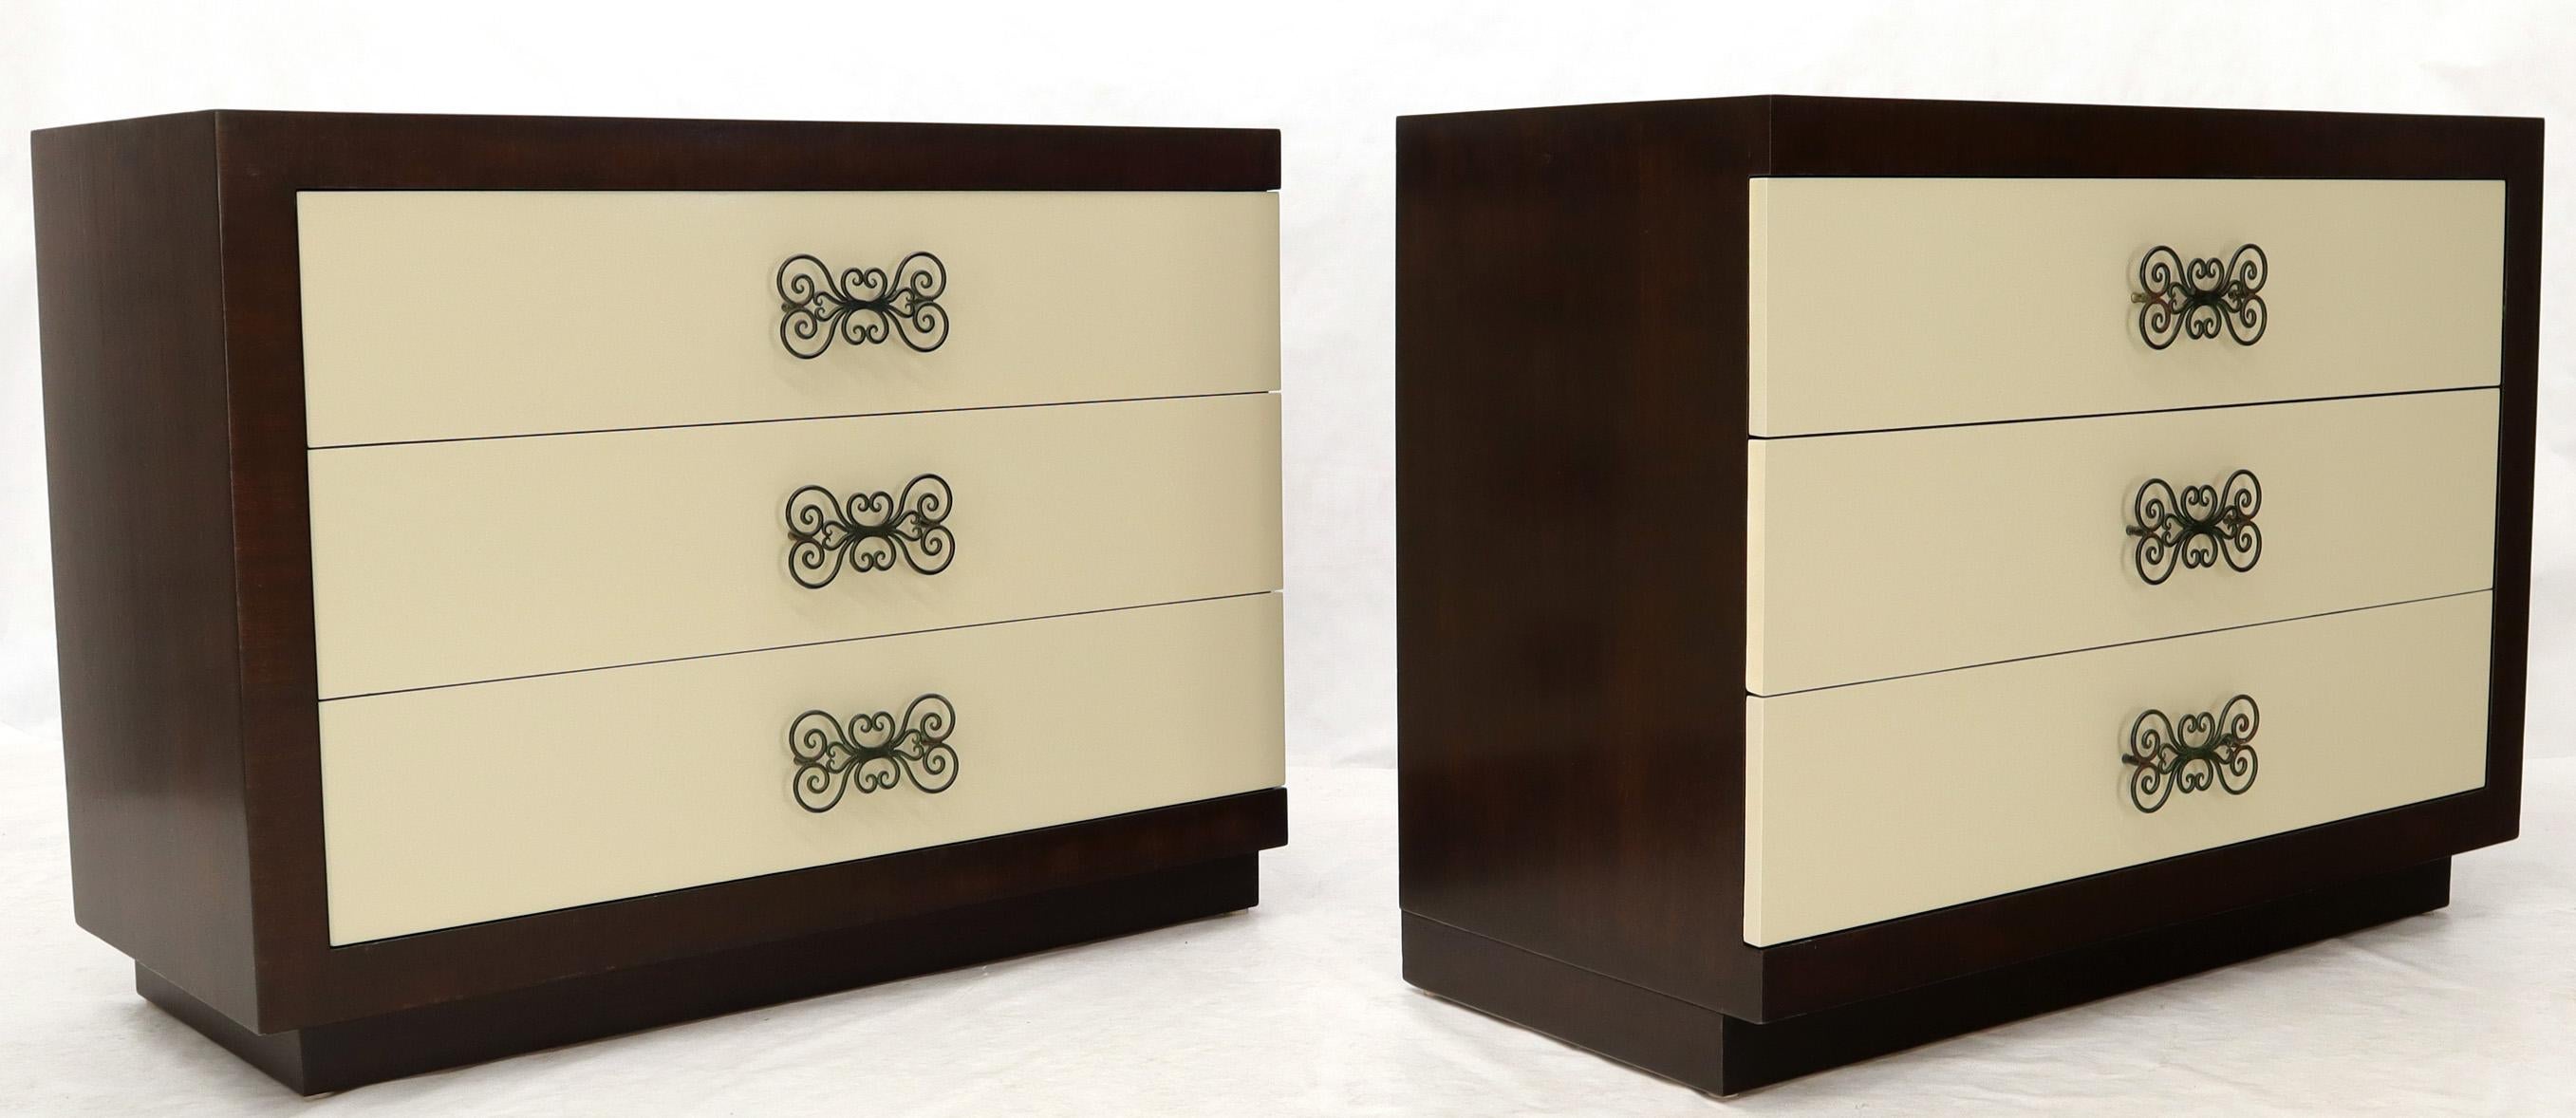 Lacquered Pair of Two-Tone Mid-Century Modern Art Deco Bachelor Chests Dressers  For Sale